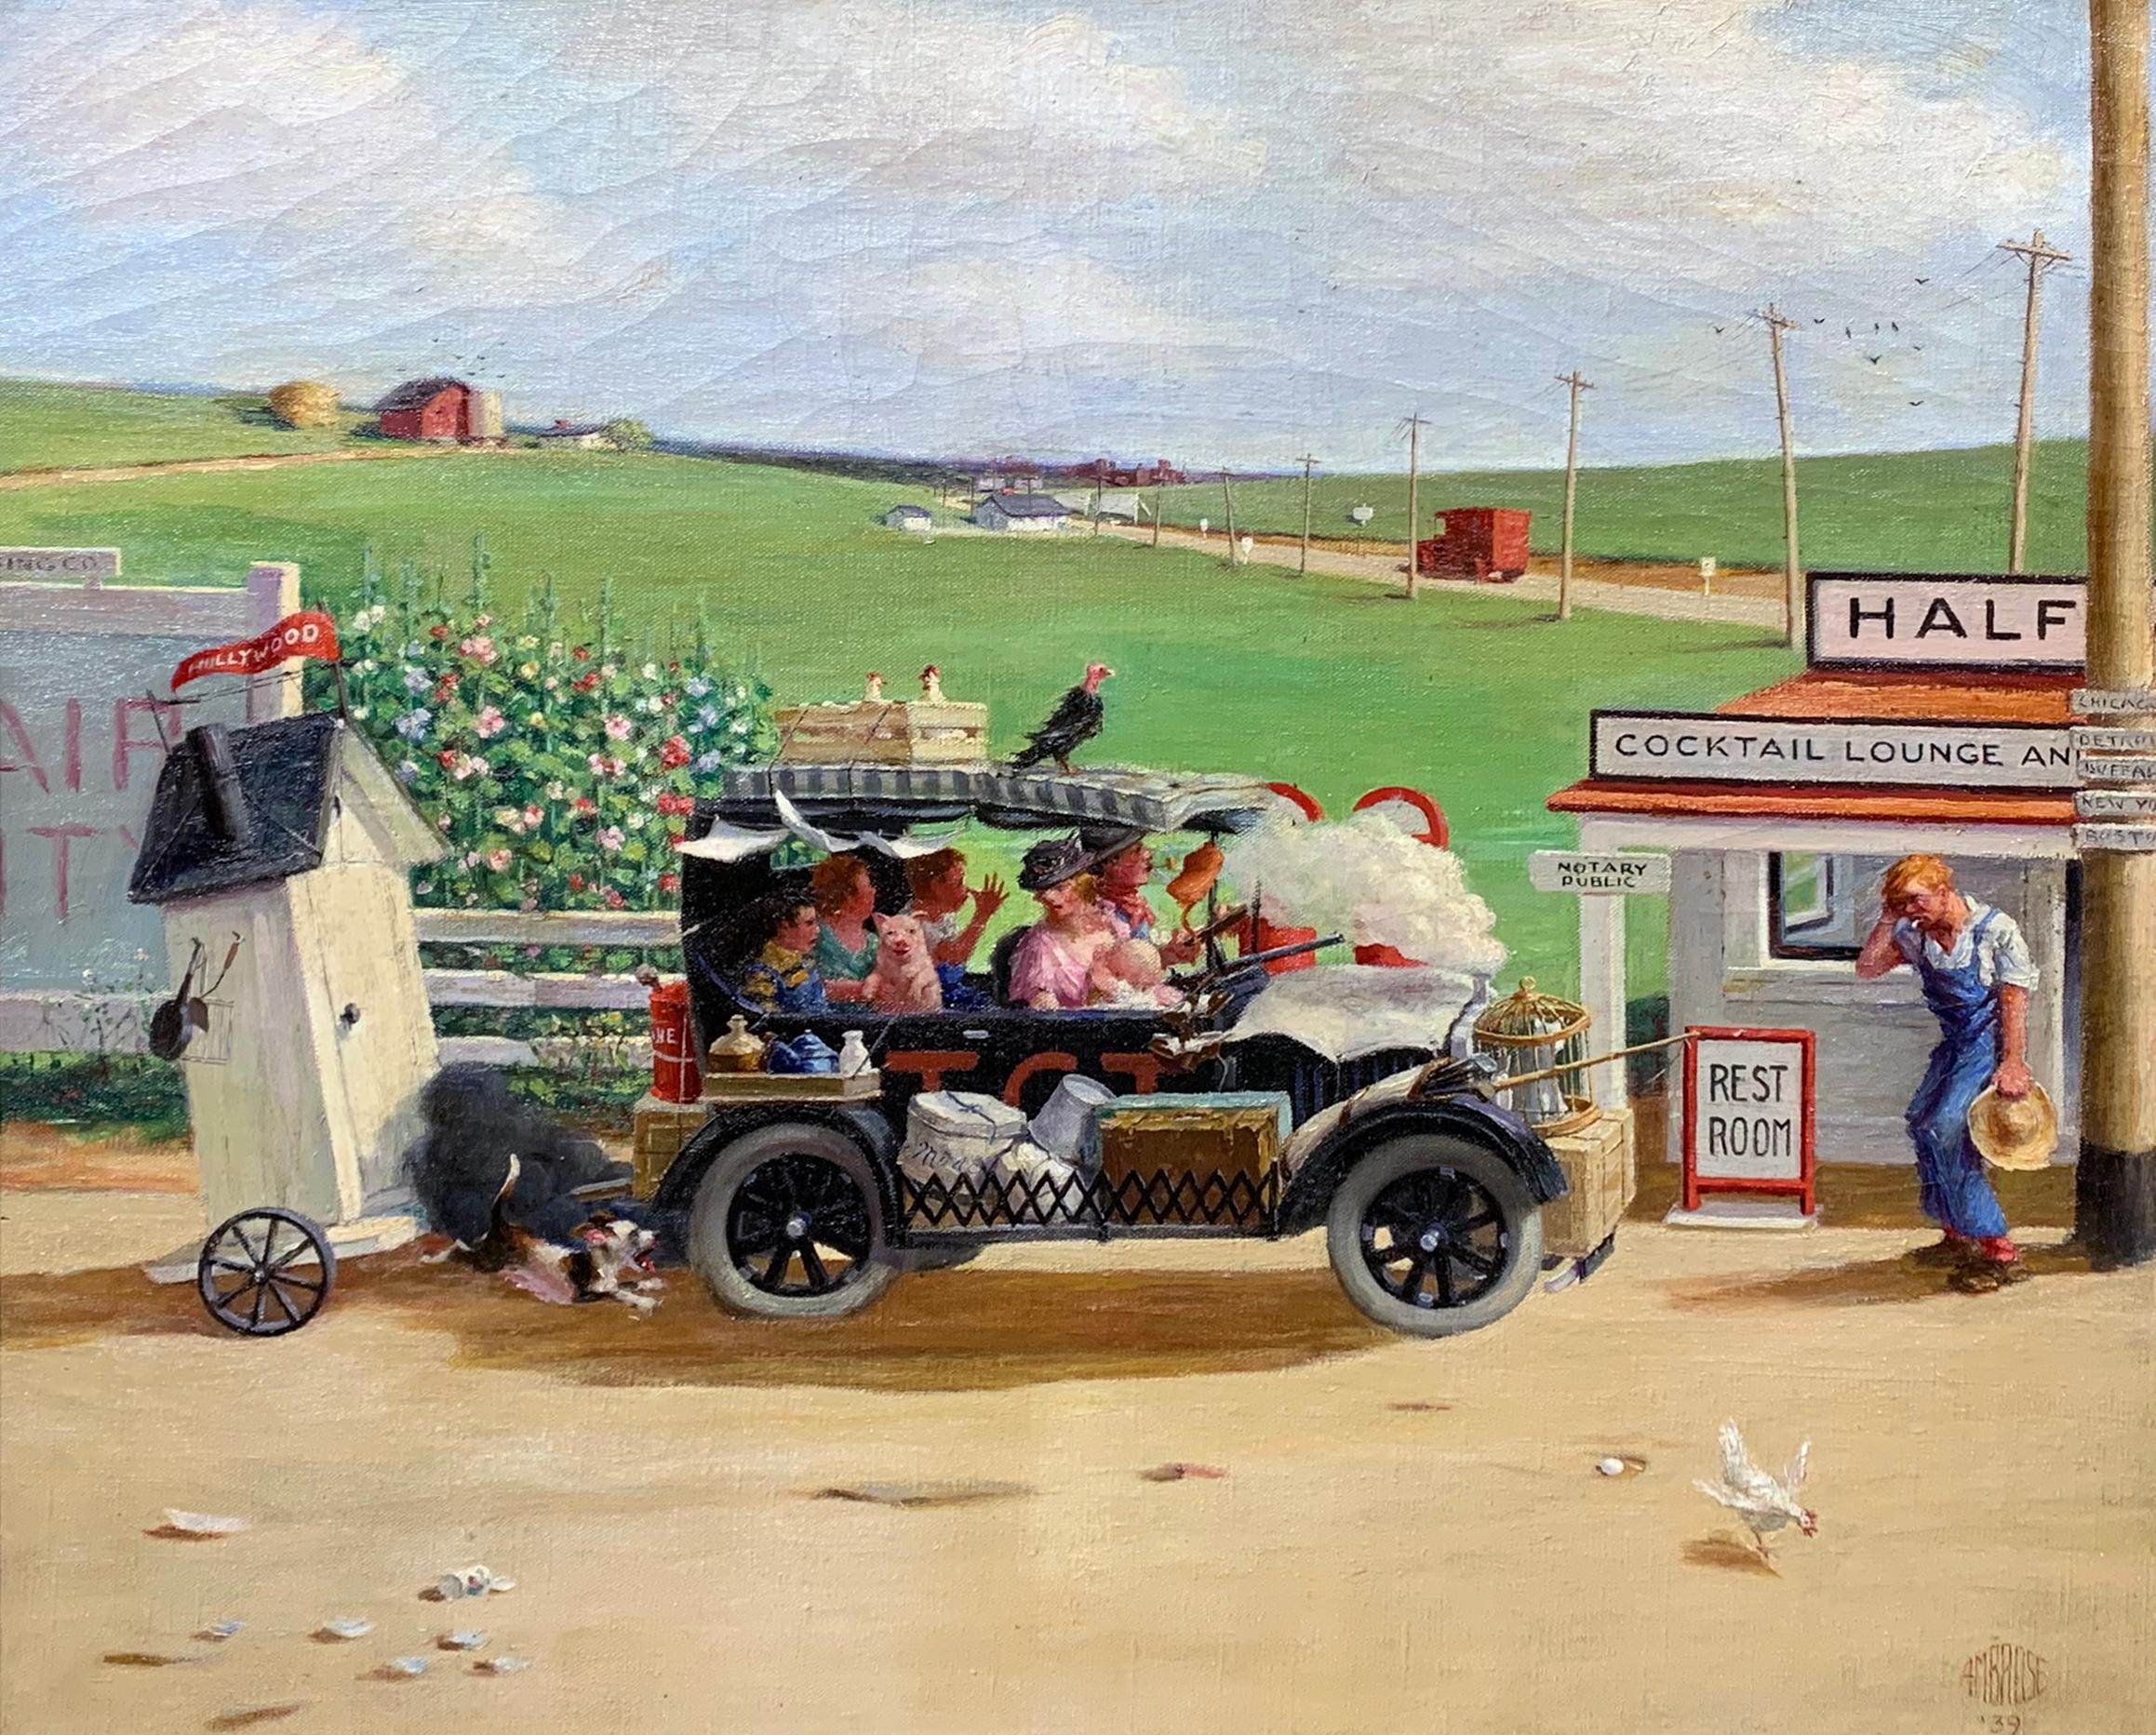 On the Road to the Cocktail Lounge, Social Realist Scene, Figurative Americana - Painting by Lester J. Ambrose